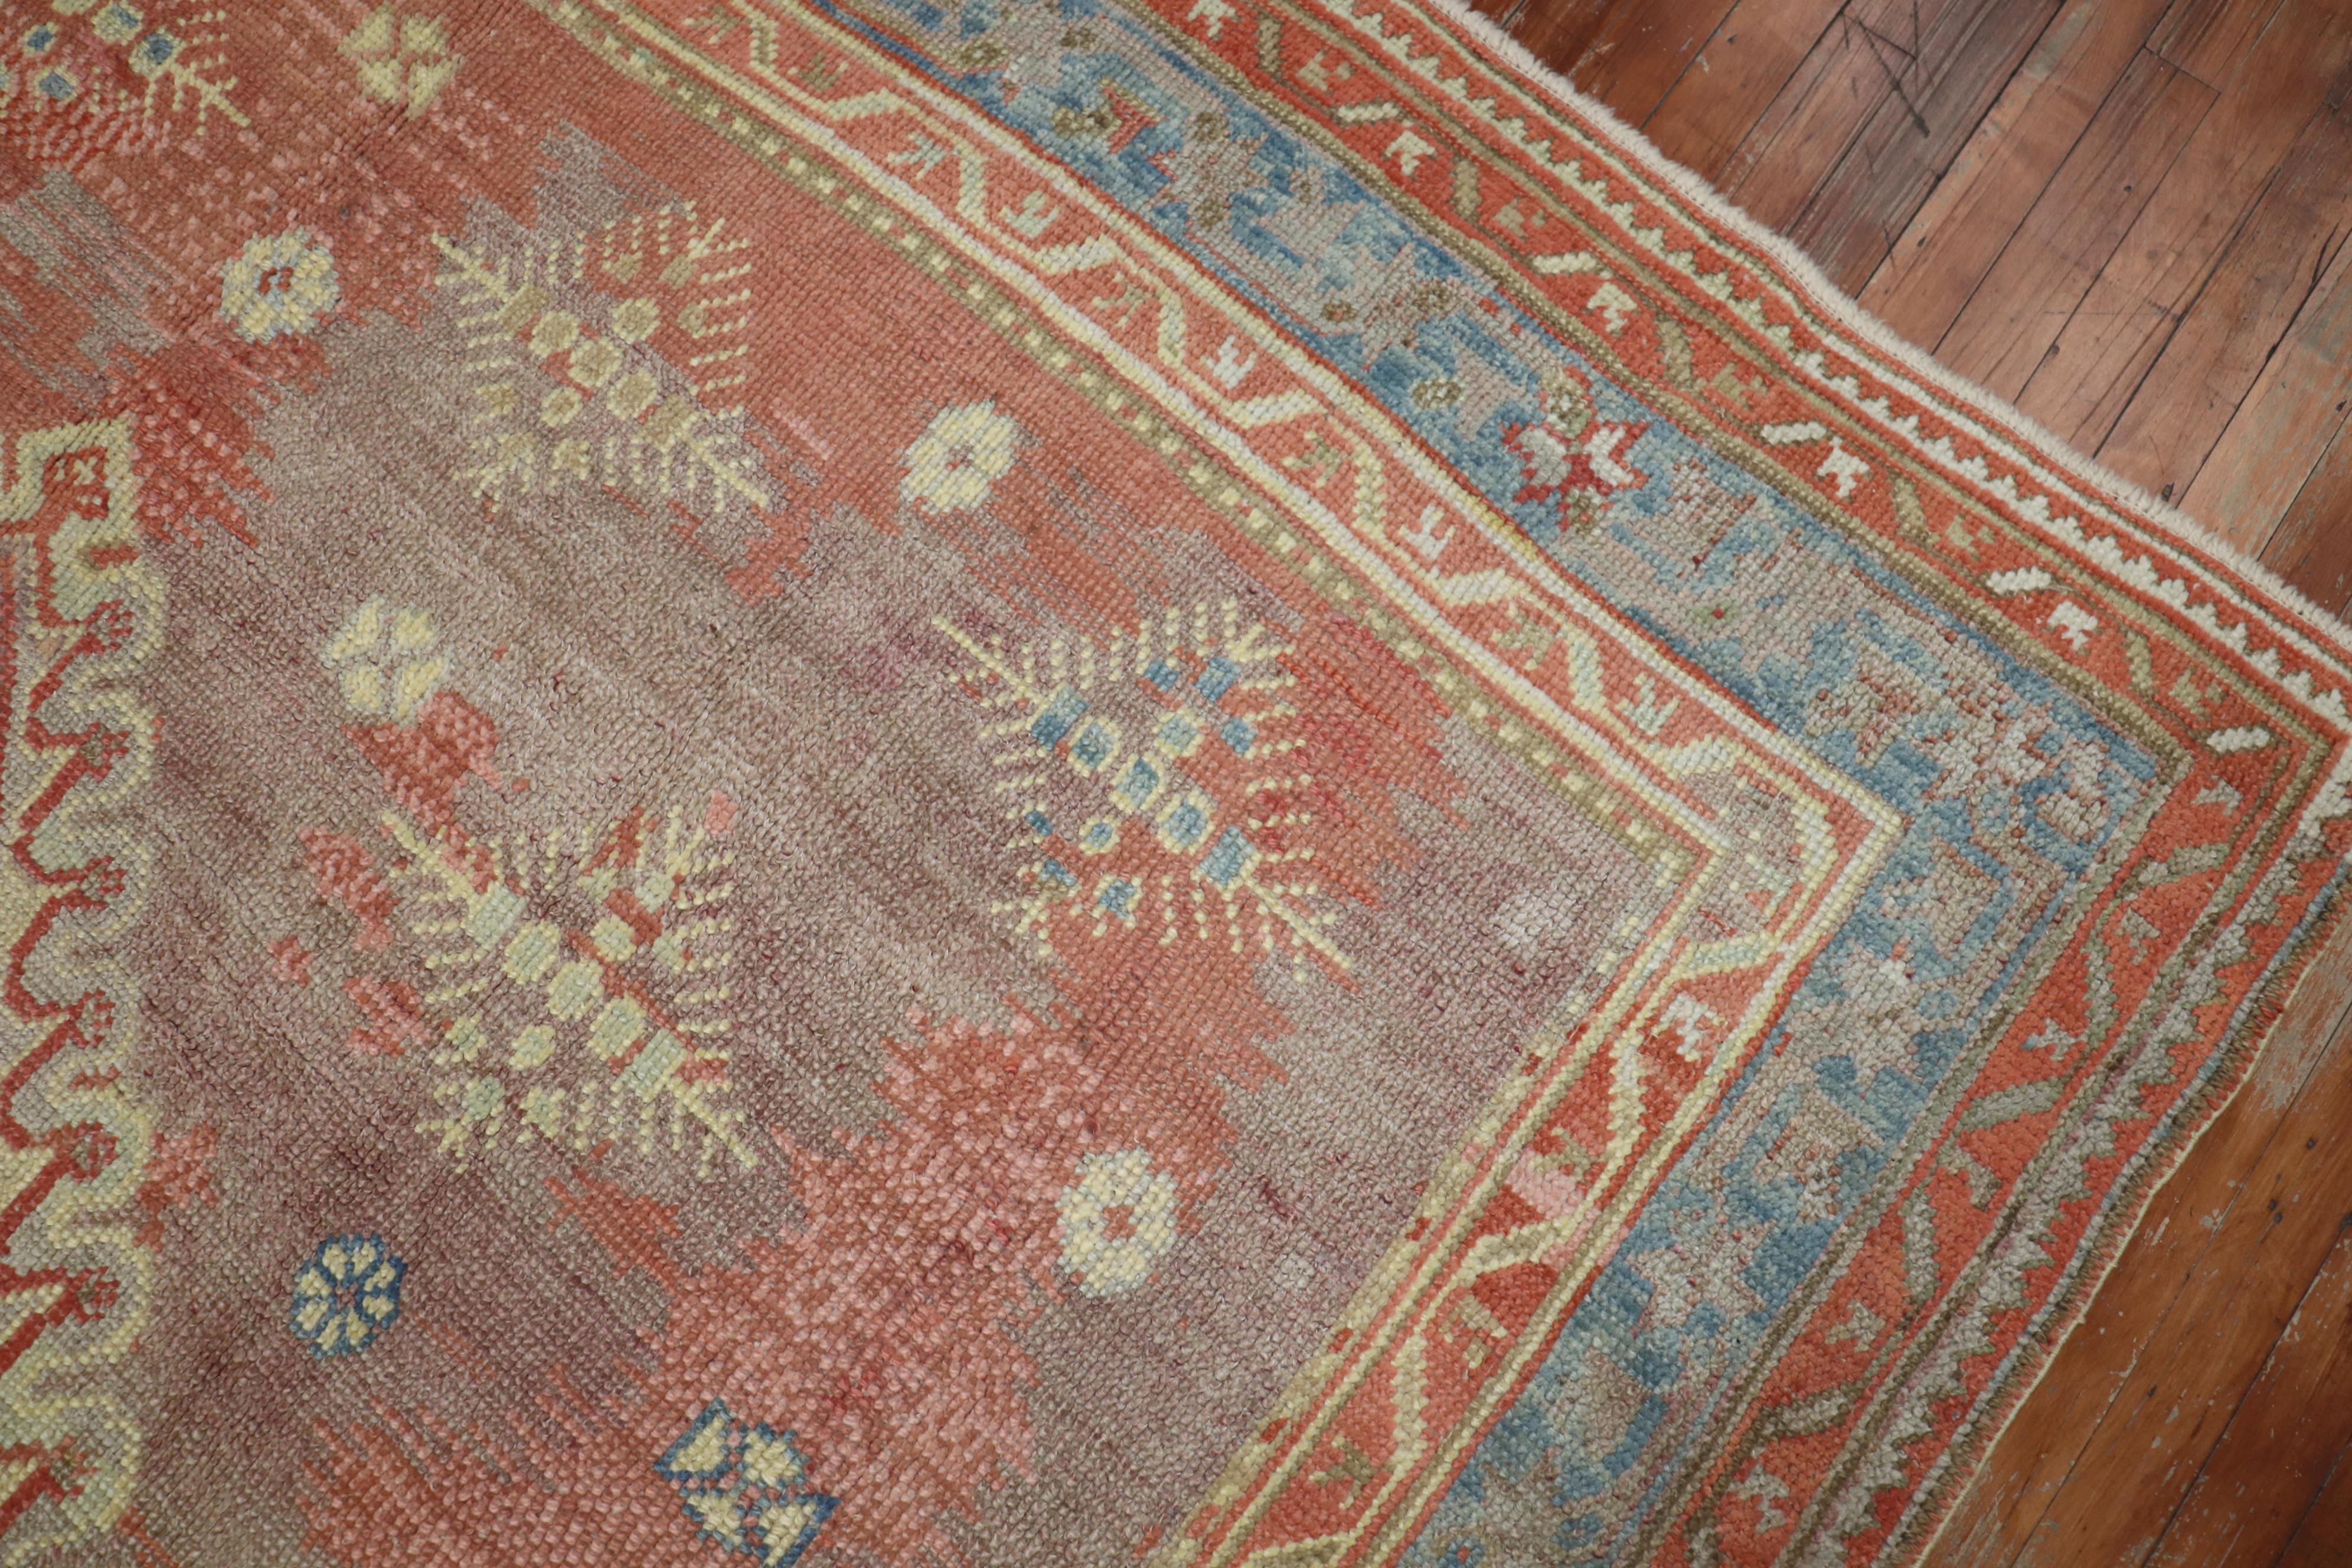 Hand-Woven Soft Red Antique Turkish Square Oushak Rug